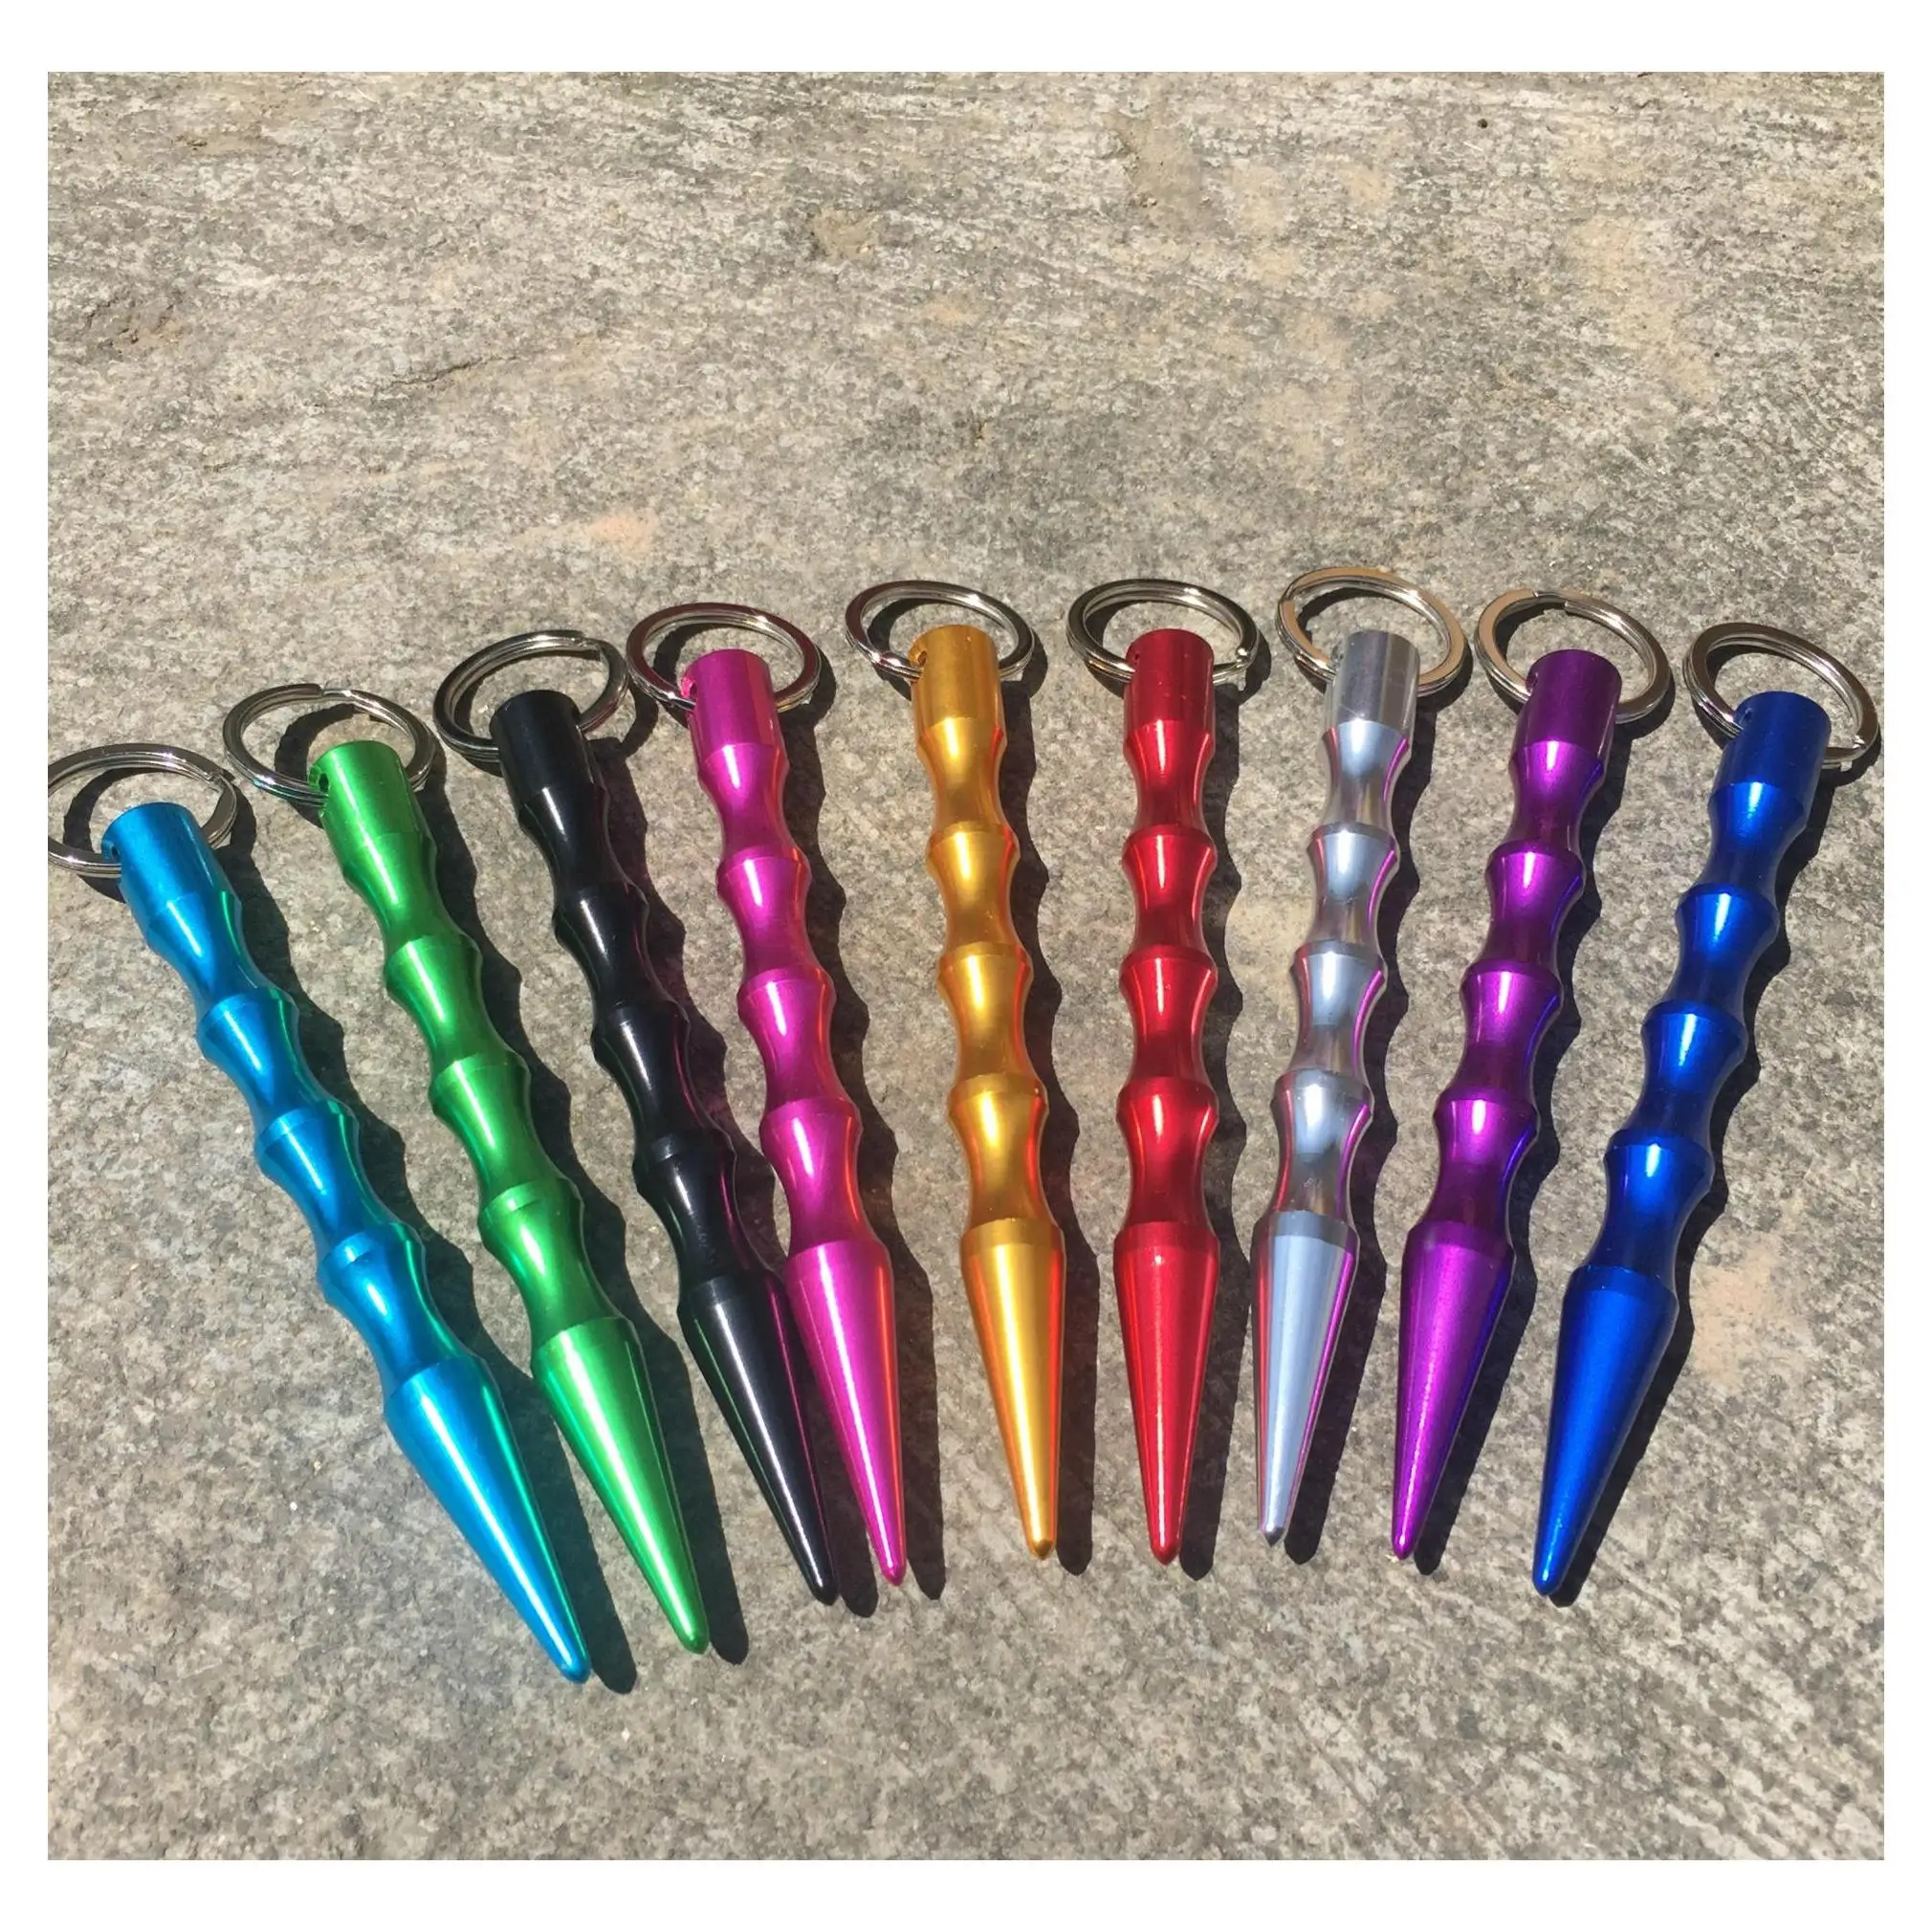 

Key Chain Rings Metal Portable Self Defense Holder Weapons Tactical Tool Fashion Women Men Design Car Key Chains Accessories Lls